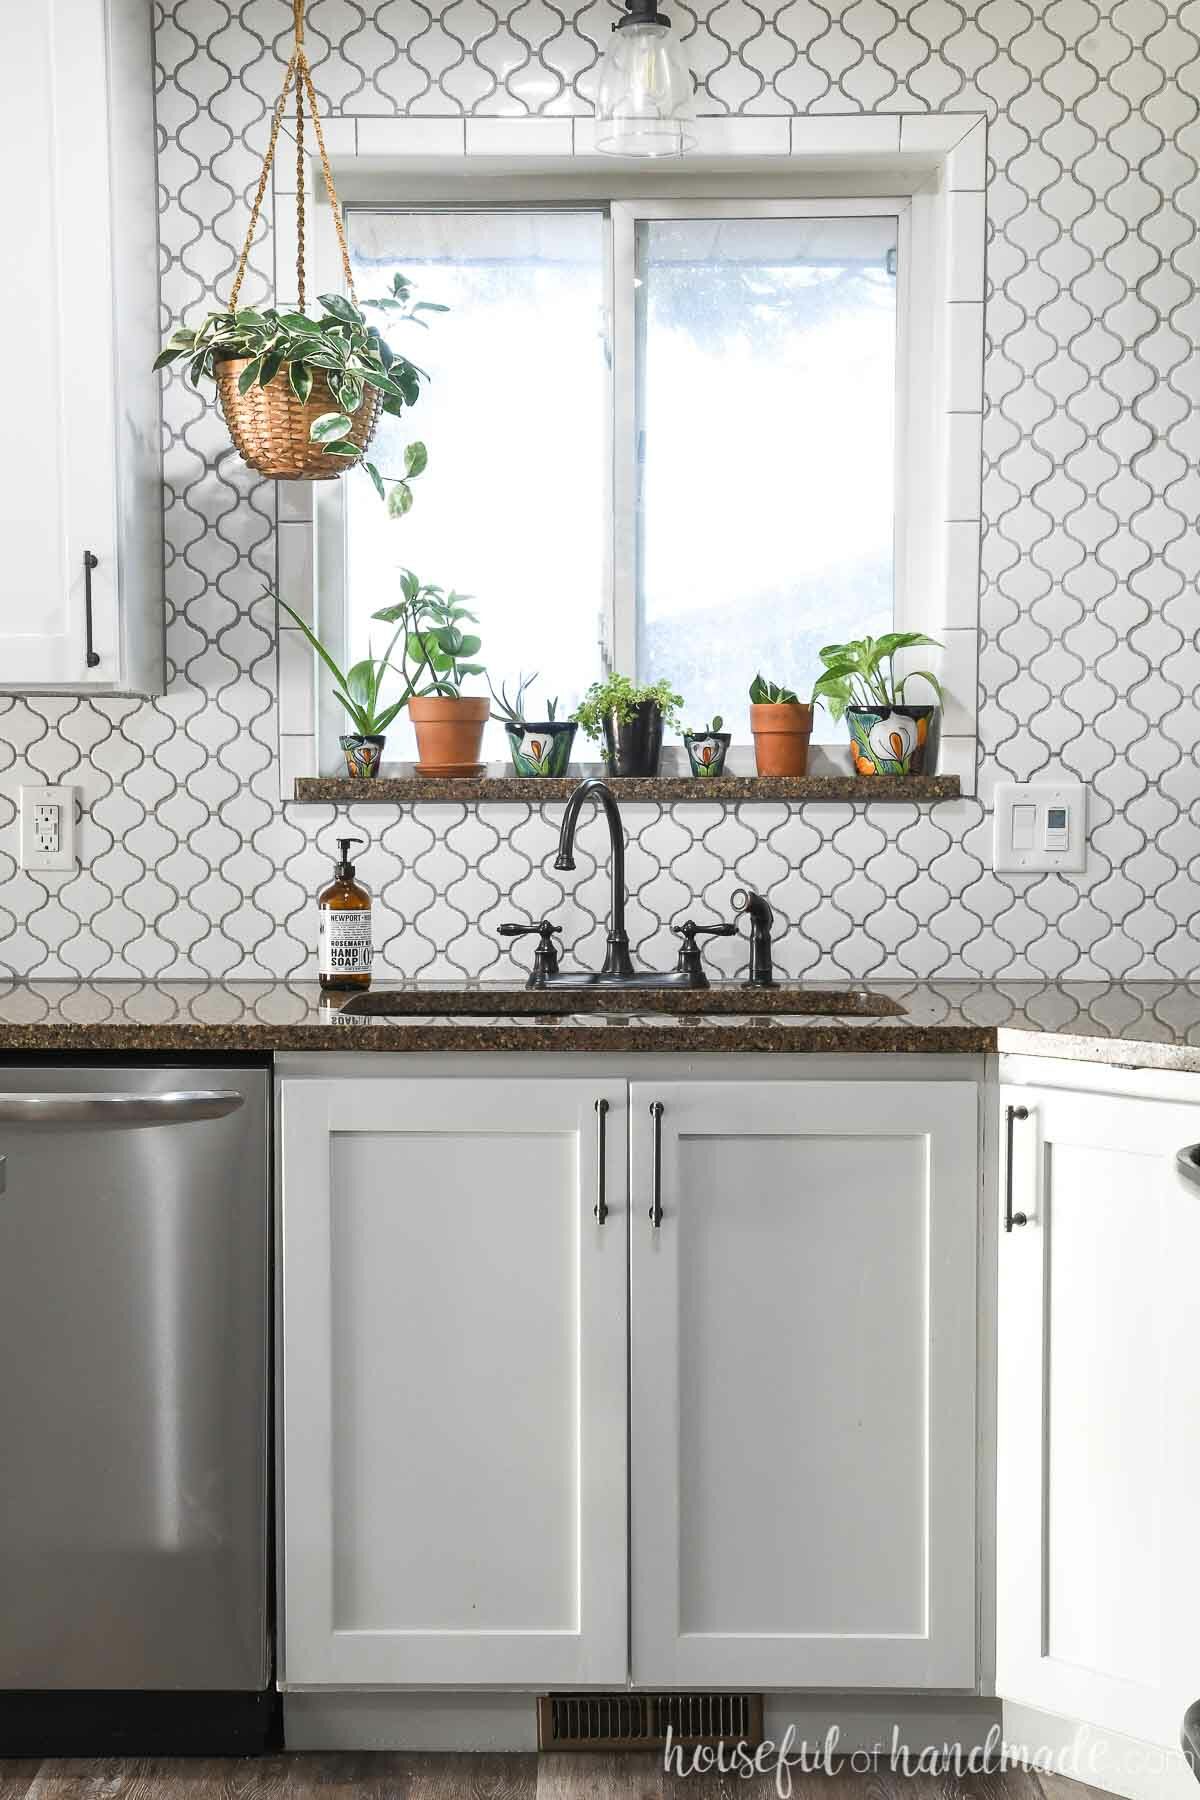 Pale gray kitchen sink cabinet blow a window with white porcelain tile filling the wall to the ceiling and framed around the window. 